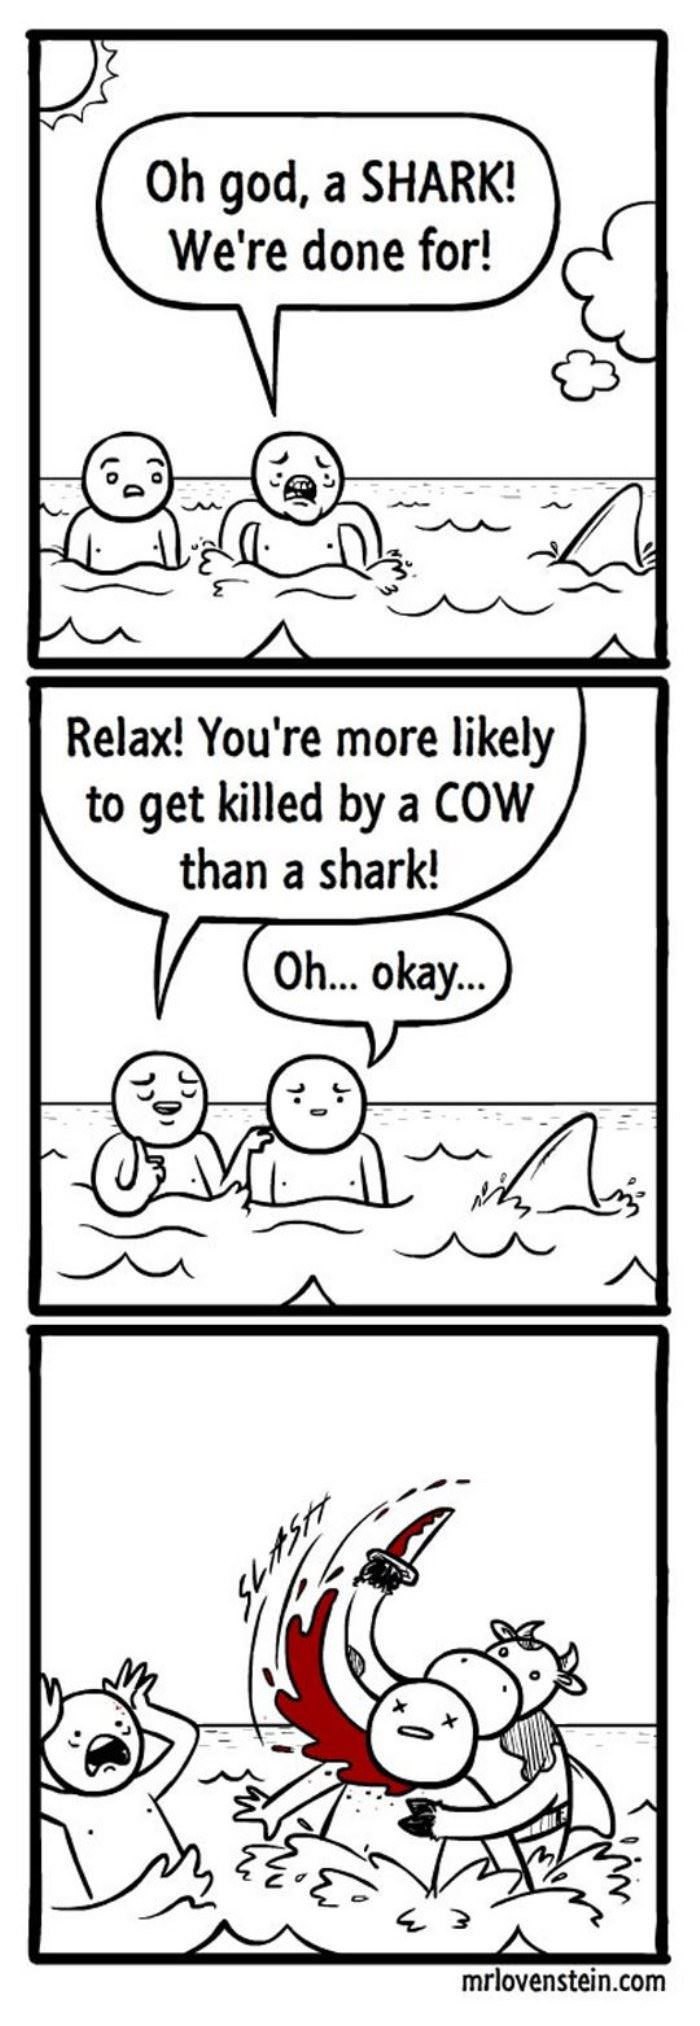 a shark funny picture